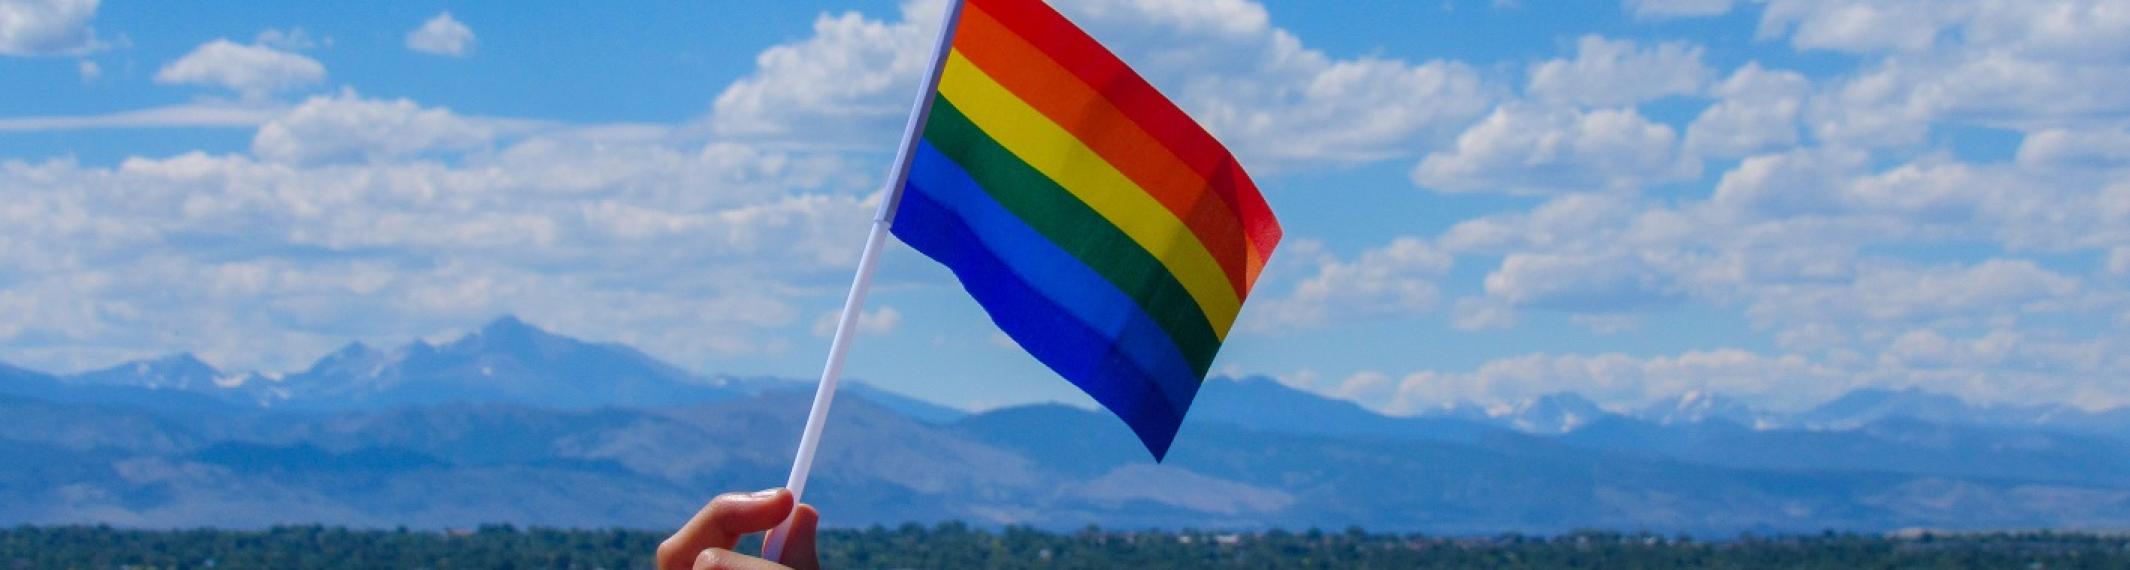 A rainbow pride flag waving in front of a mountain backdrop on a partly cloudy day